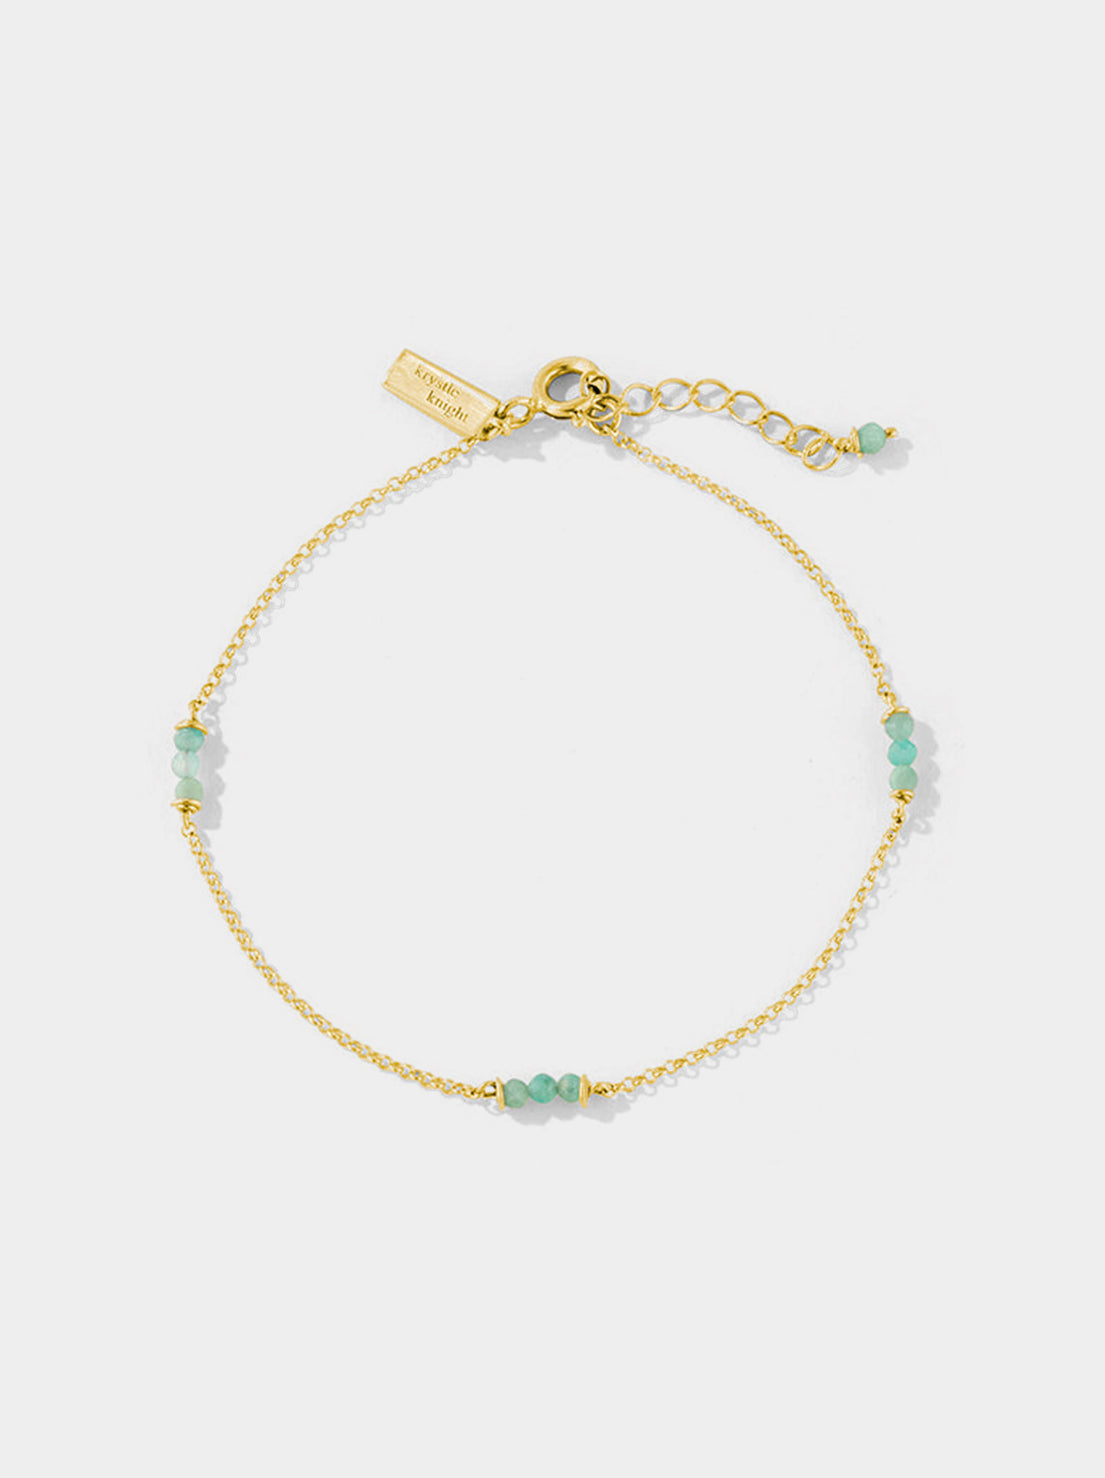 Krystle Knight - Infinite Courage Bracelet - Amazonite - Gold Plated